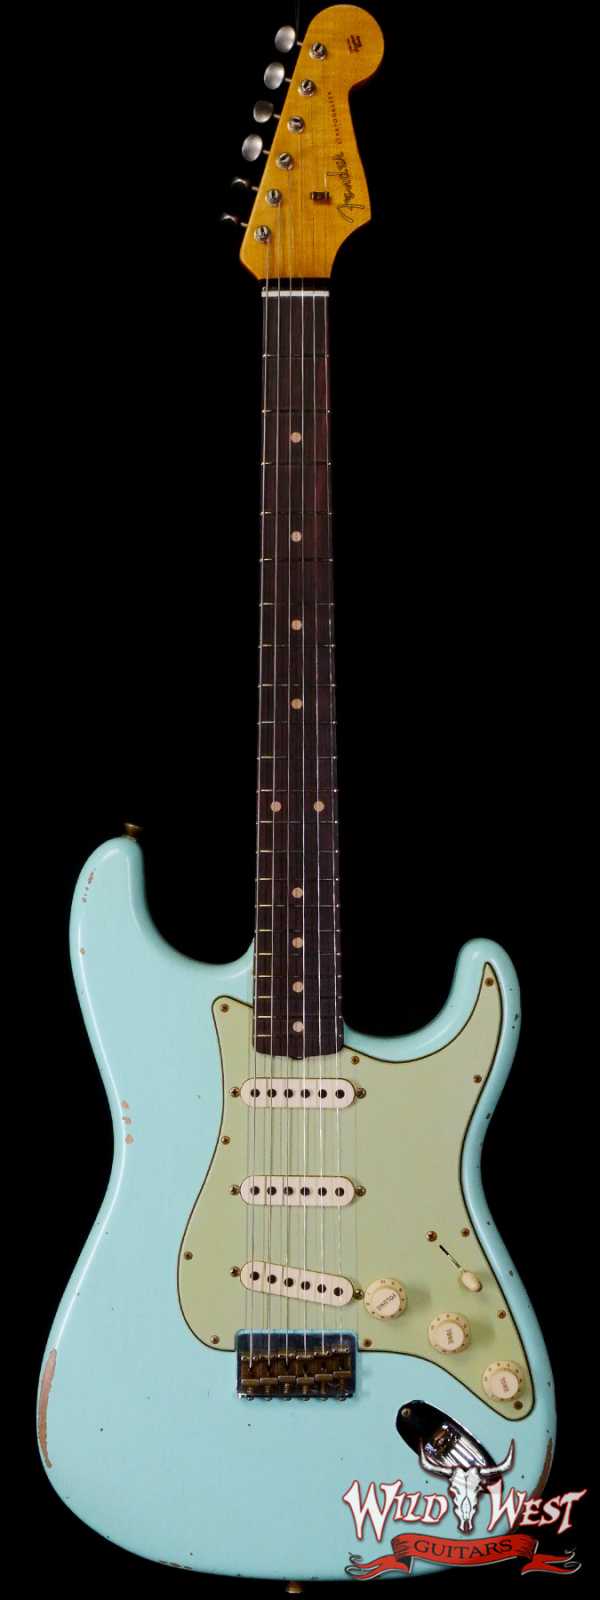 Fender Custom Shop 1962 Stratocaster Hardtail Hand-Wound Pickups AAA Dark Rosewood Slab Board Relic Surf Green 6.60 LBS